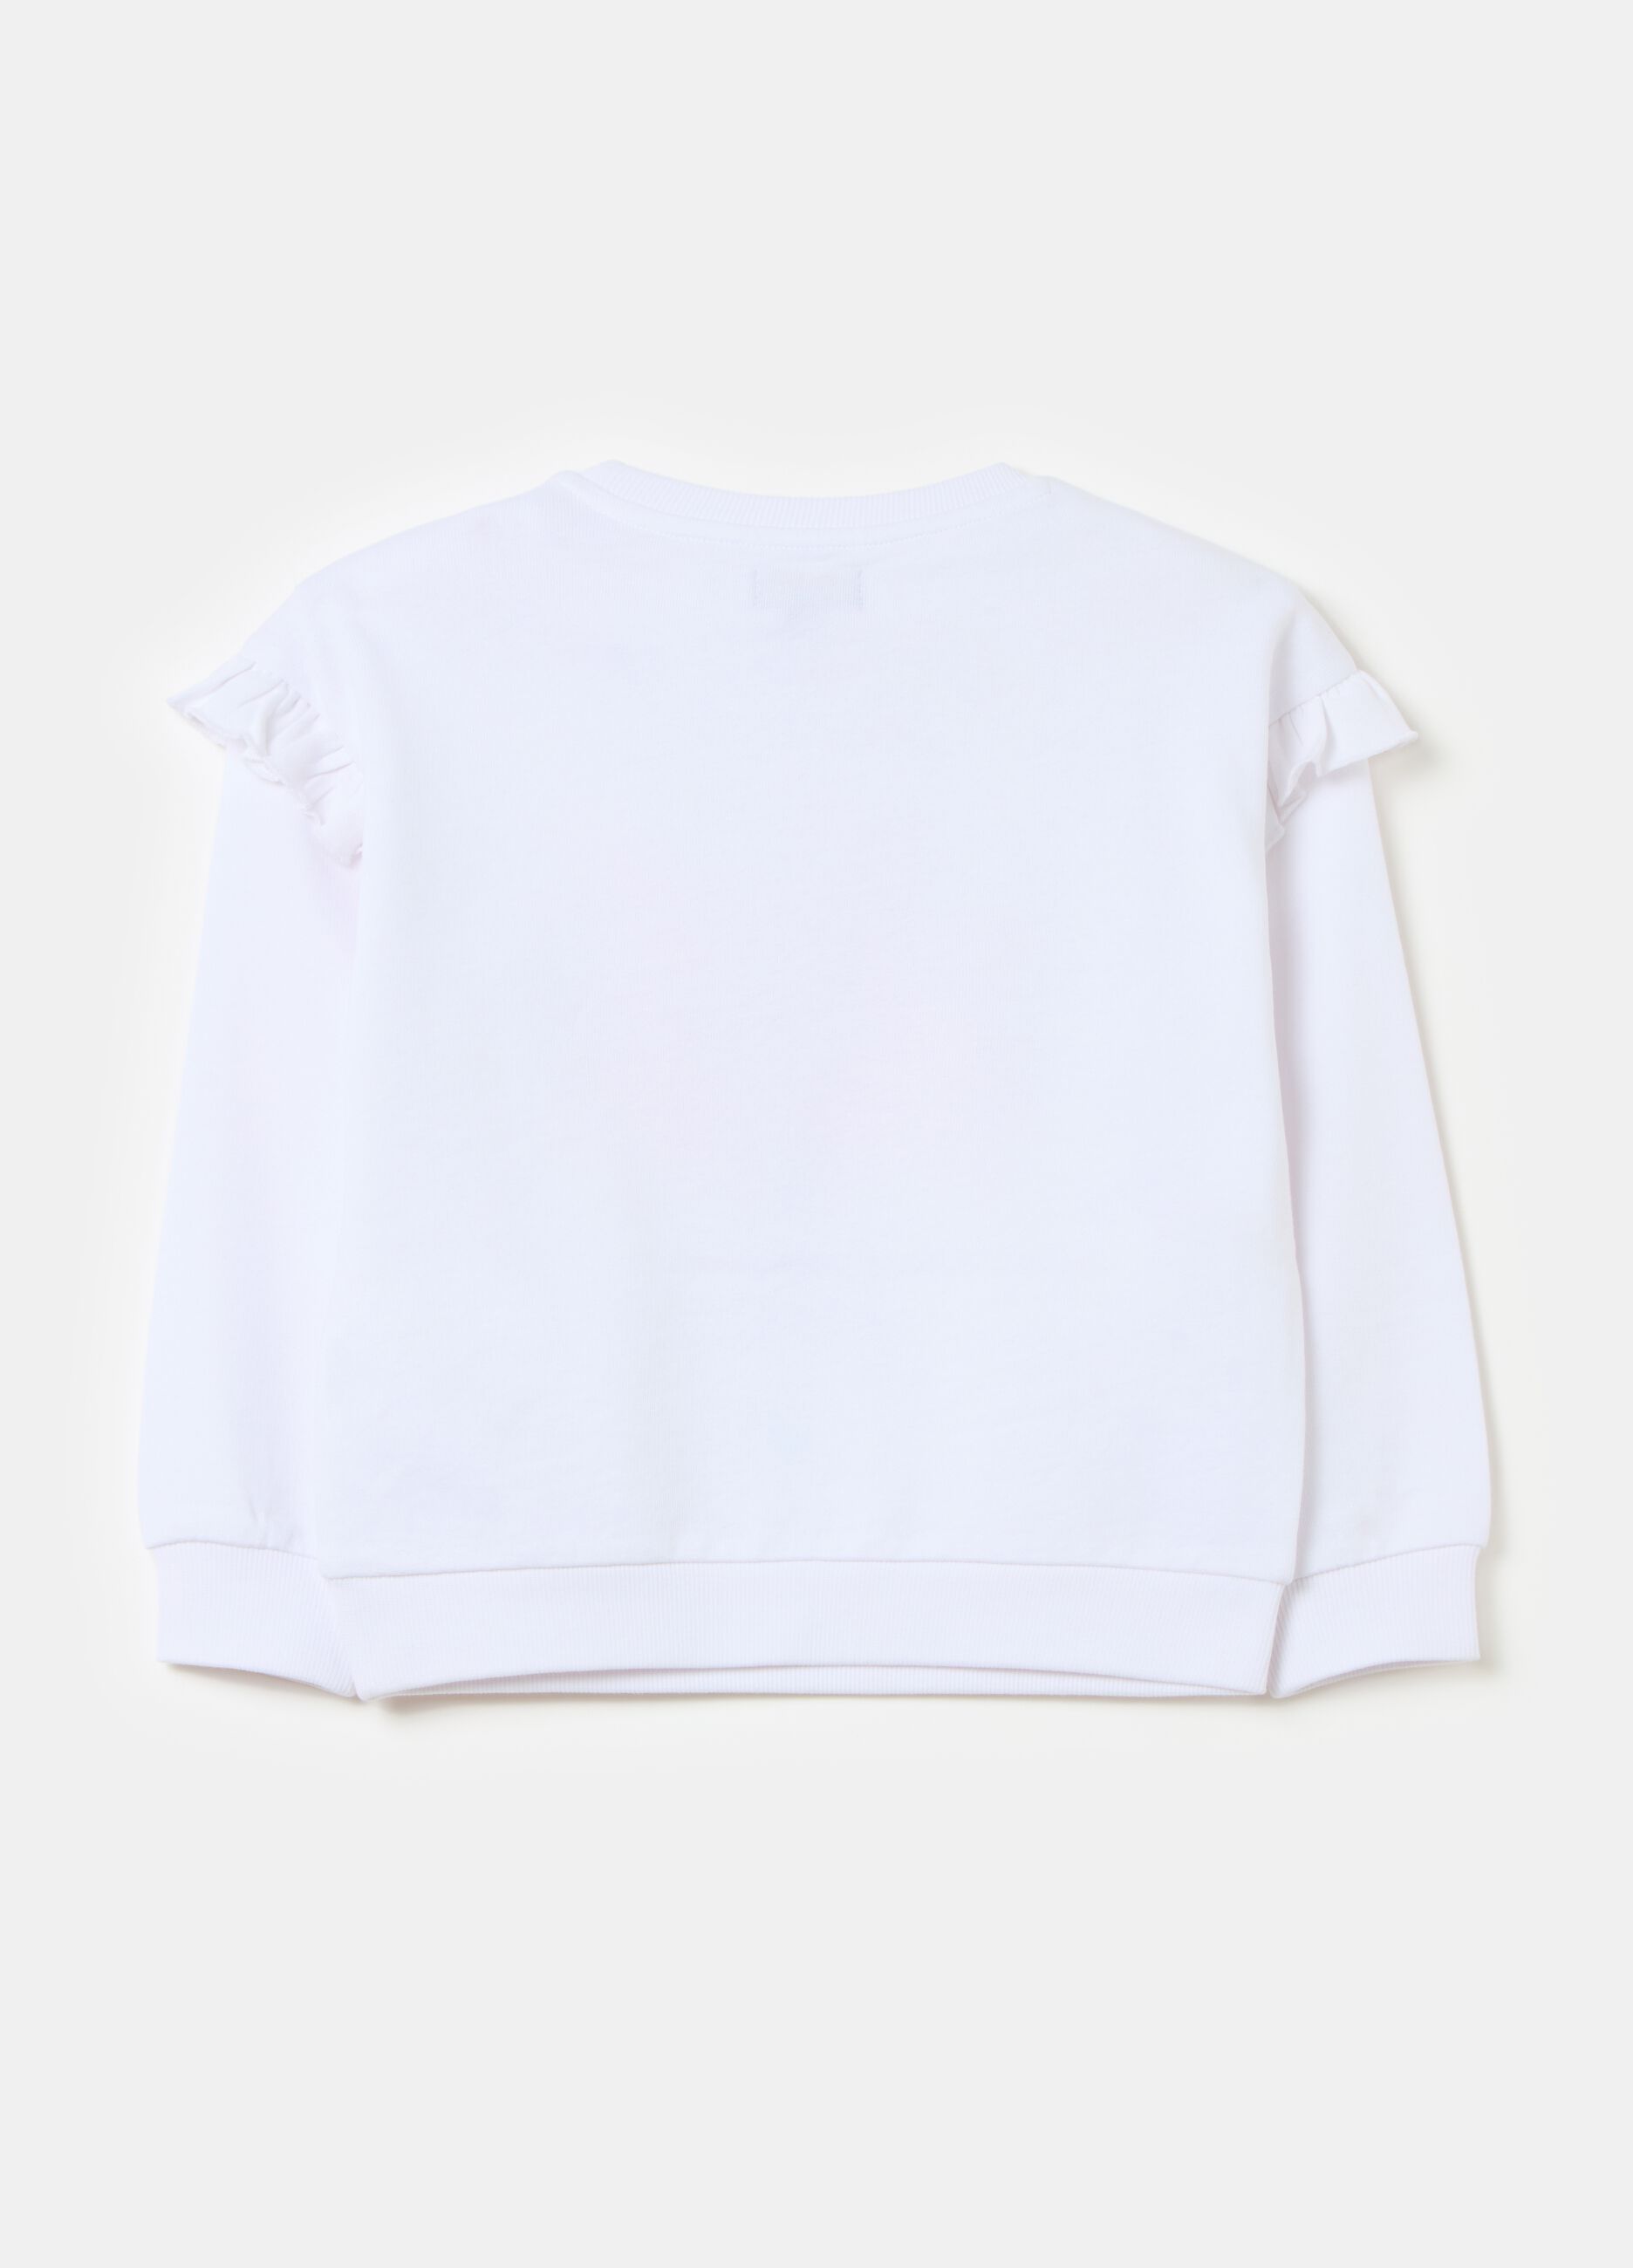 Sweatshirt in French terry with frills and print